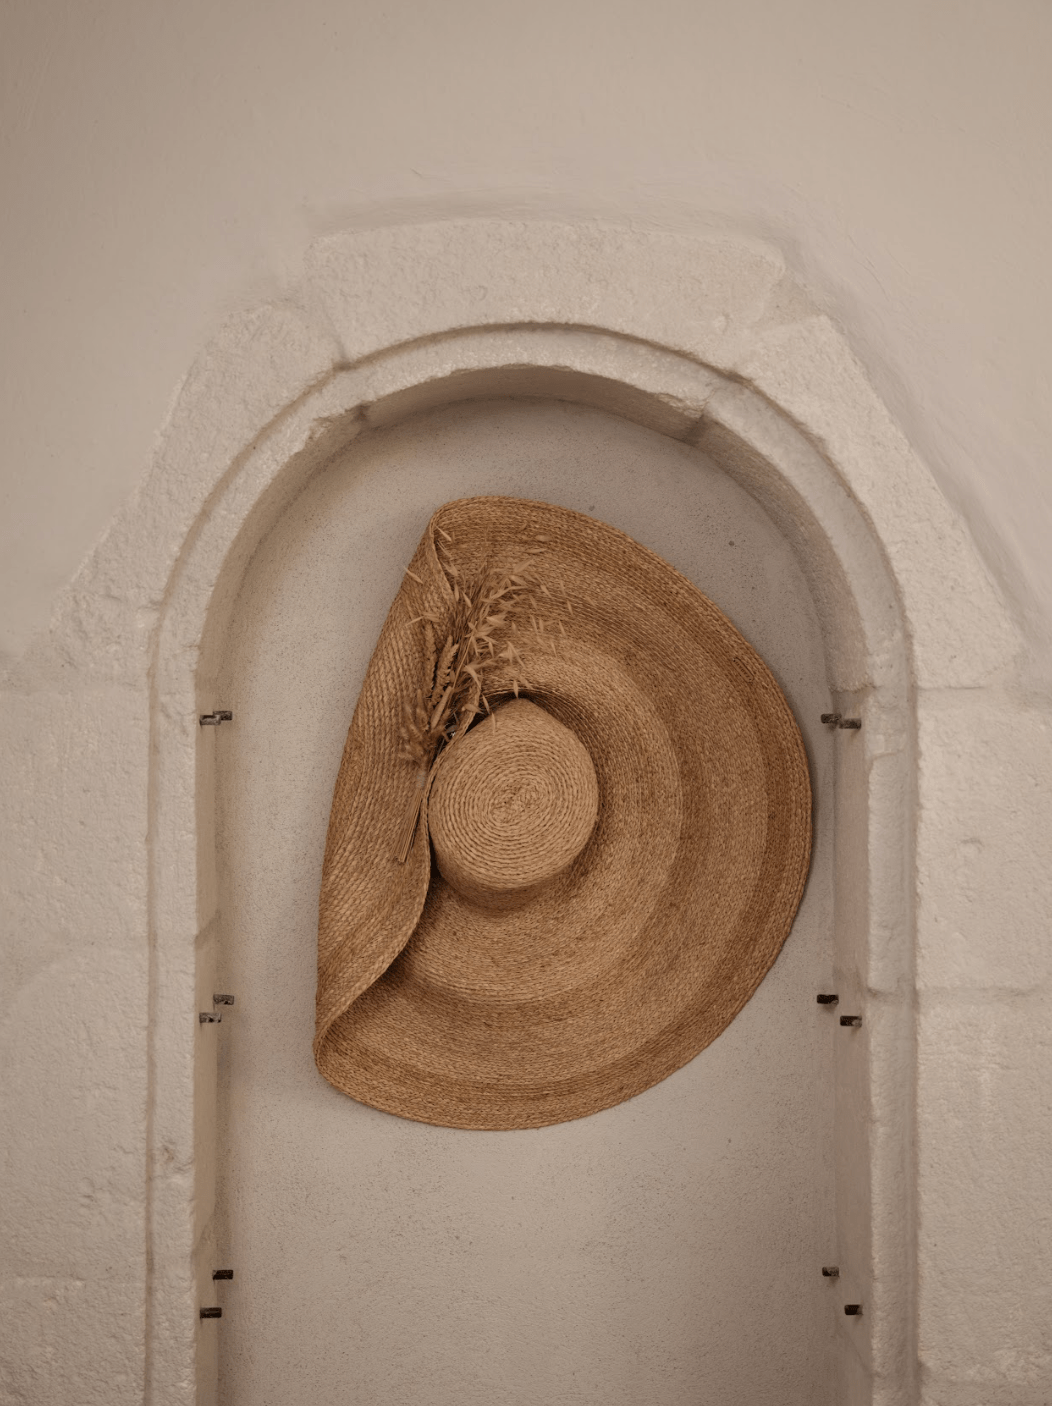 Straw hat hanging on a stone wall at the Maison des Remparts.